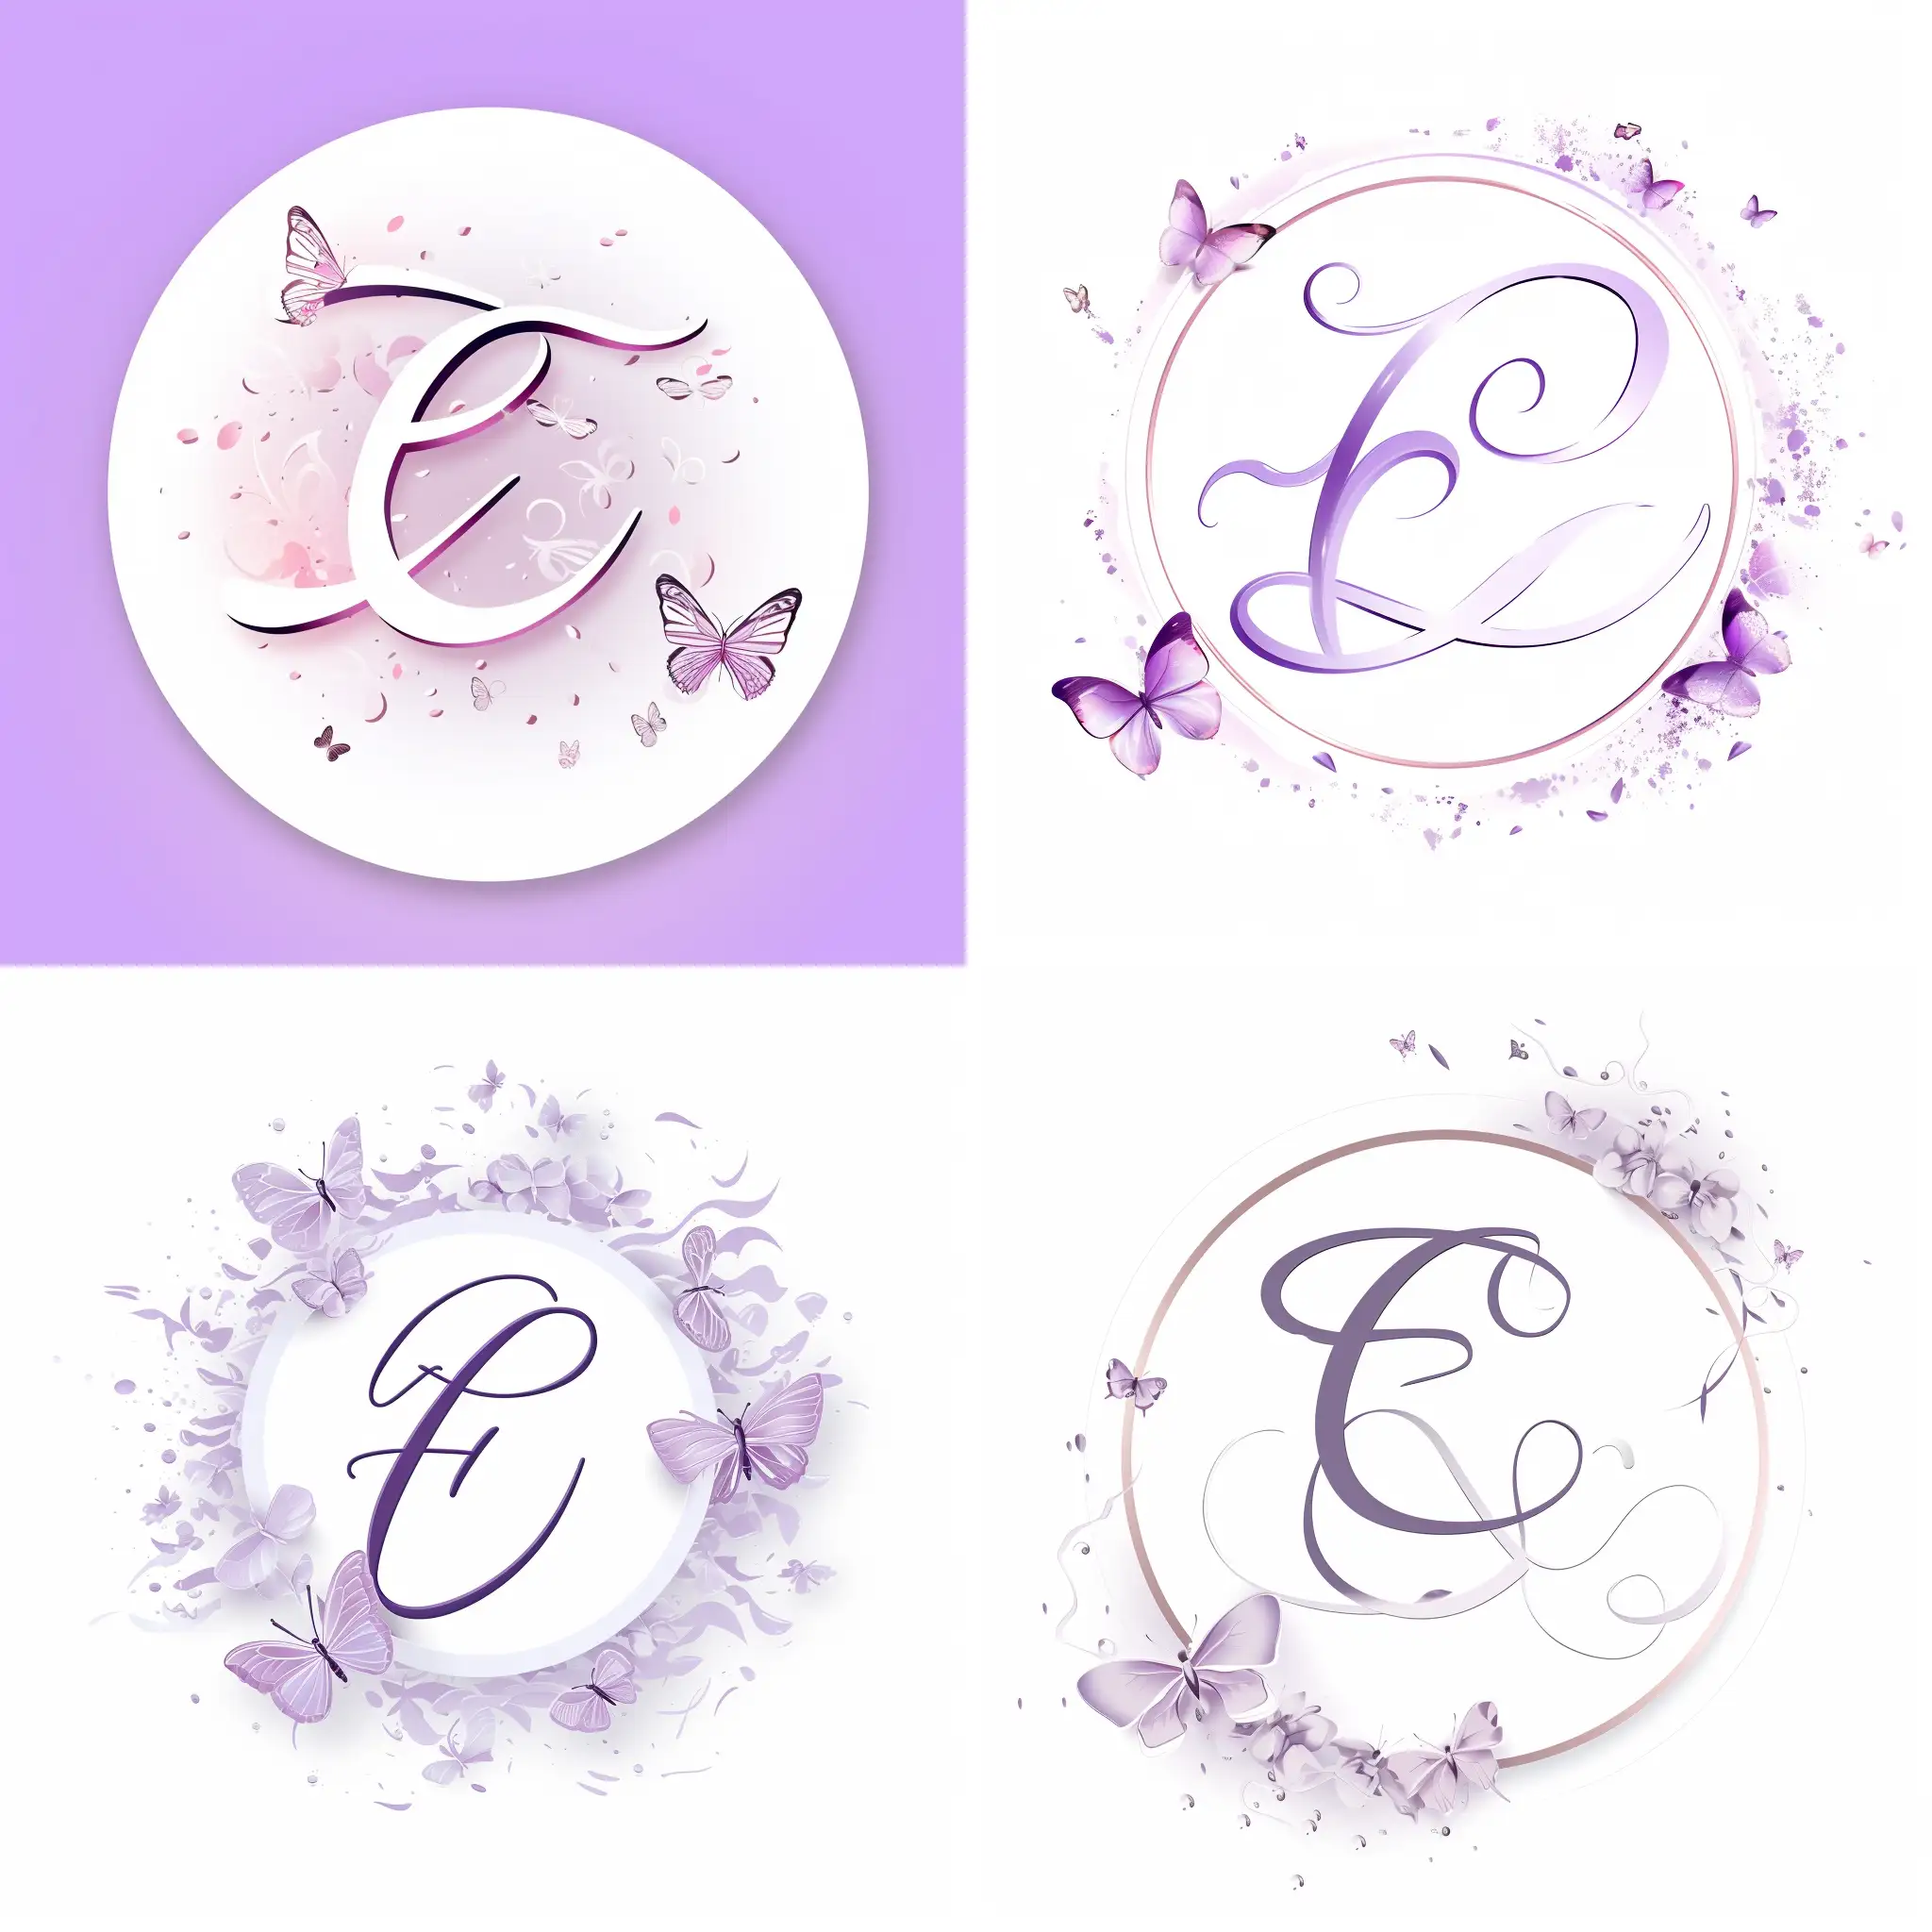 Elegant-White-Cursive-Letter-E-Logo-with-Lilac-Accents-and-Butterflies-in-Circular-Design